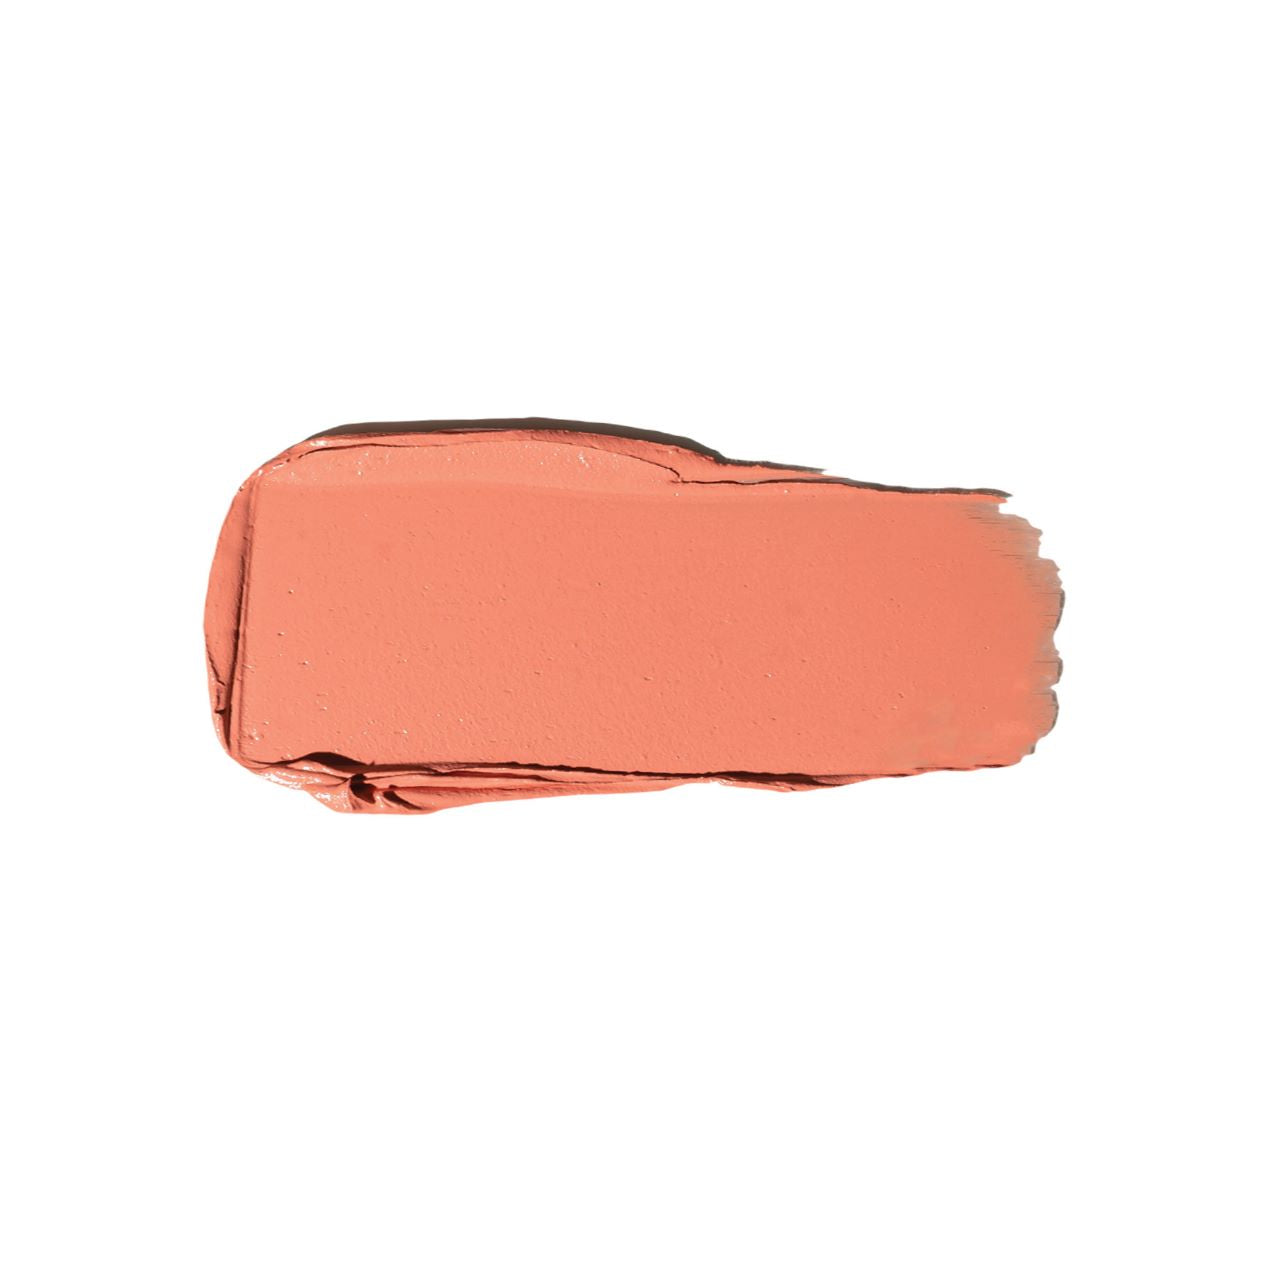 Nudies Matte Lux All-Over Face Blush